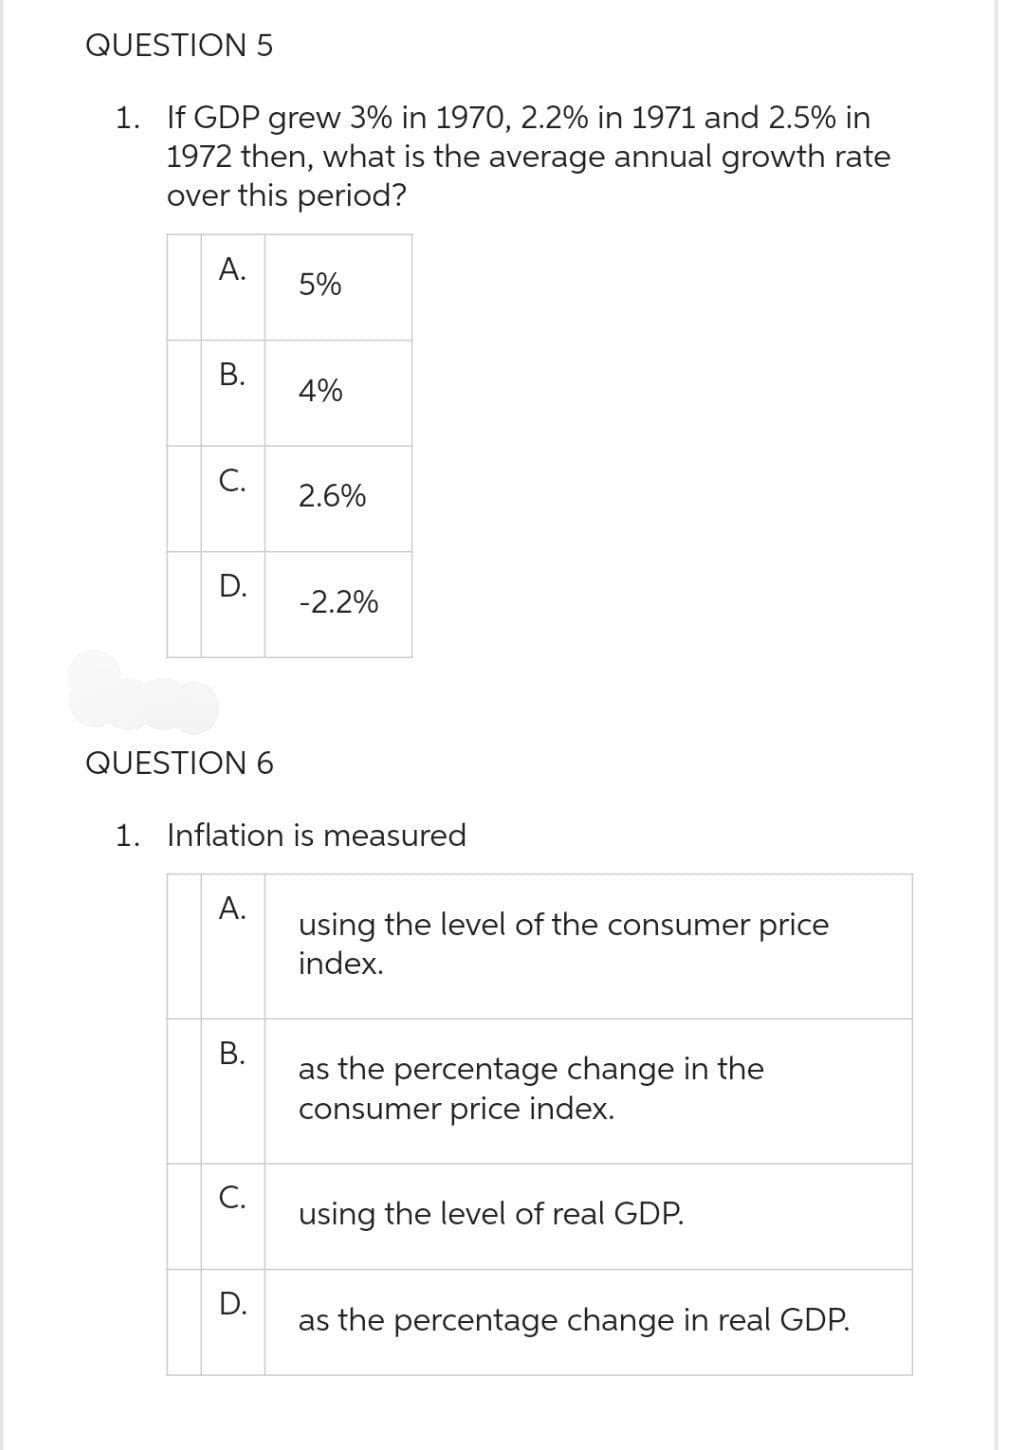 QUESTION 5
1. If GDP grew 3% in 1970, 2.2% in 1971 and 2.5% in
1972 then, what is the average annual growth rate
over this period?
A.
B.
C.
D.
QUESTION 6
A.
B.
C.
5%
1. Inflation is measured
D.
4%
2.6%
-2.2%
using the level of the consumer price
index.
as the percentage change in the
consumer price index.
using the level of real GDP.
as the percentage change in real GDP.